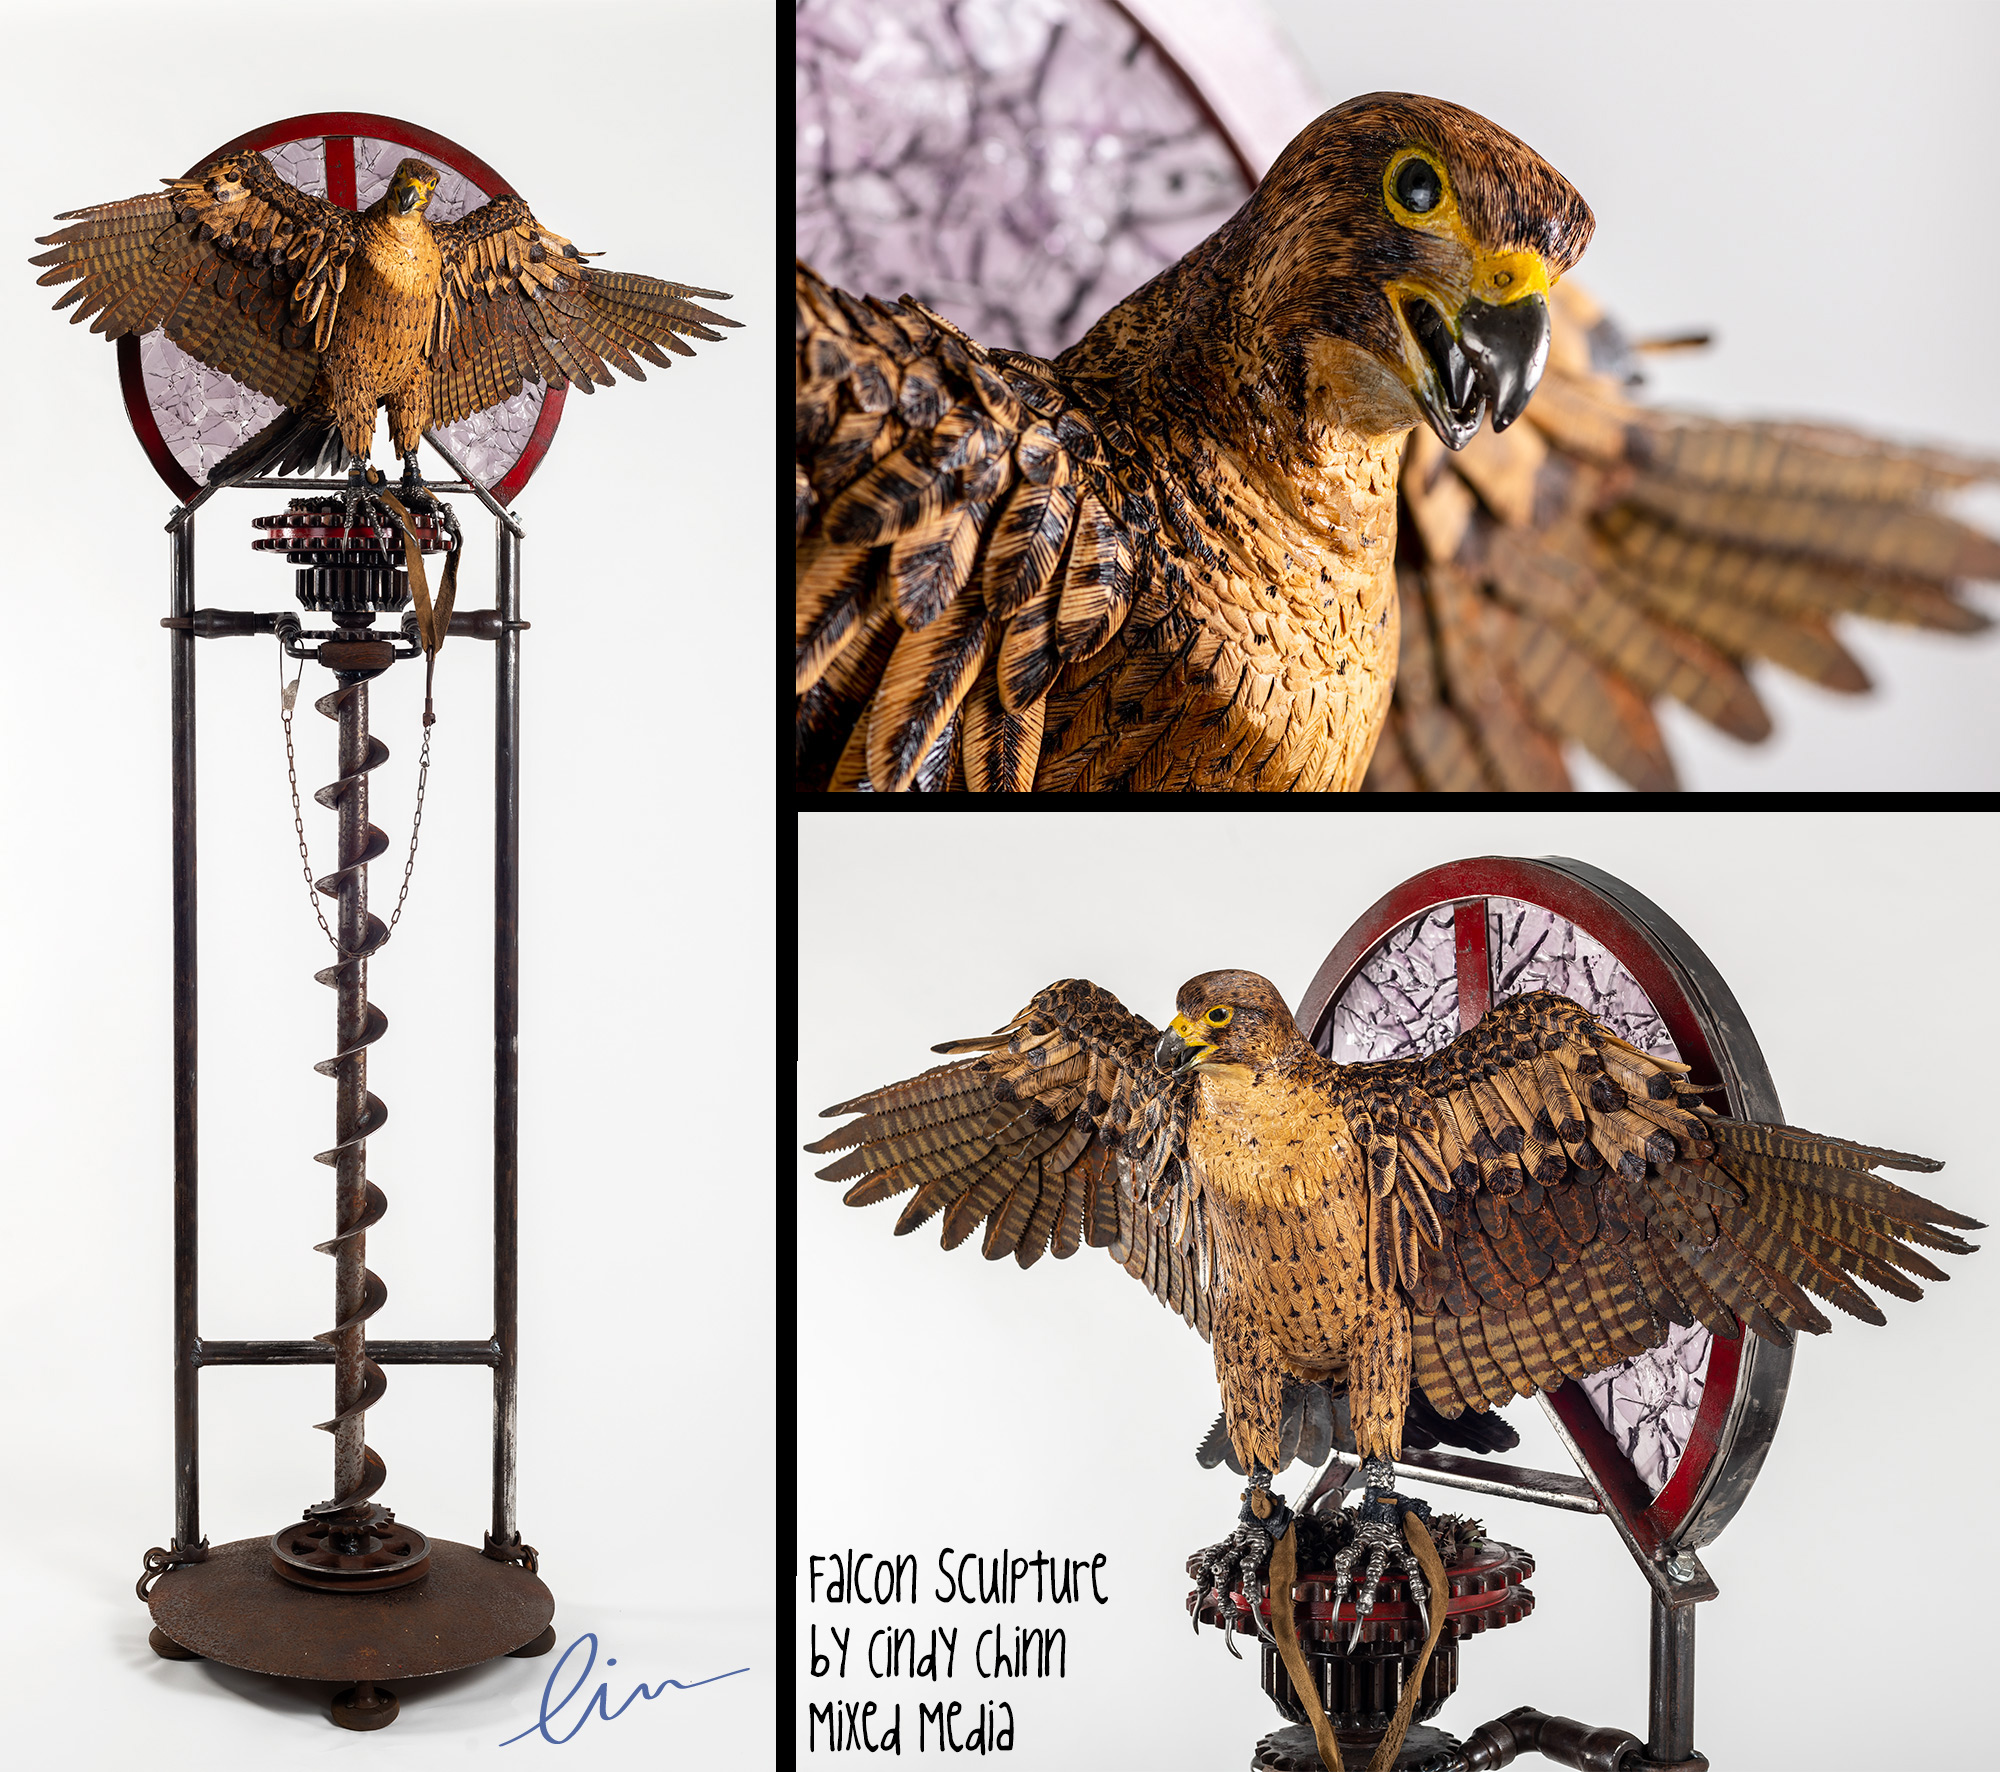 Falcon sculpture from metal and wood by Cindy Chinn